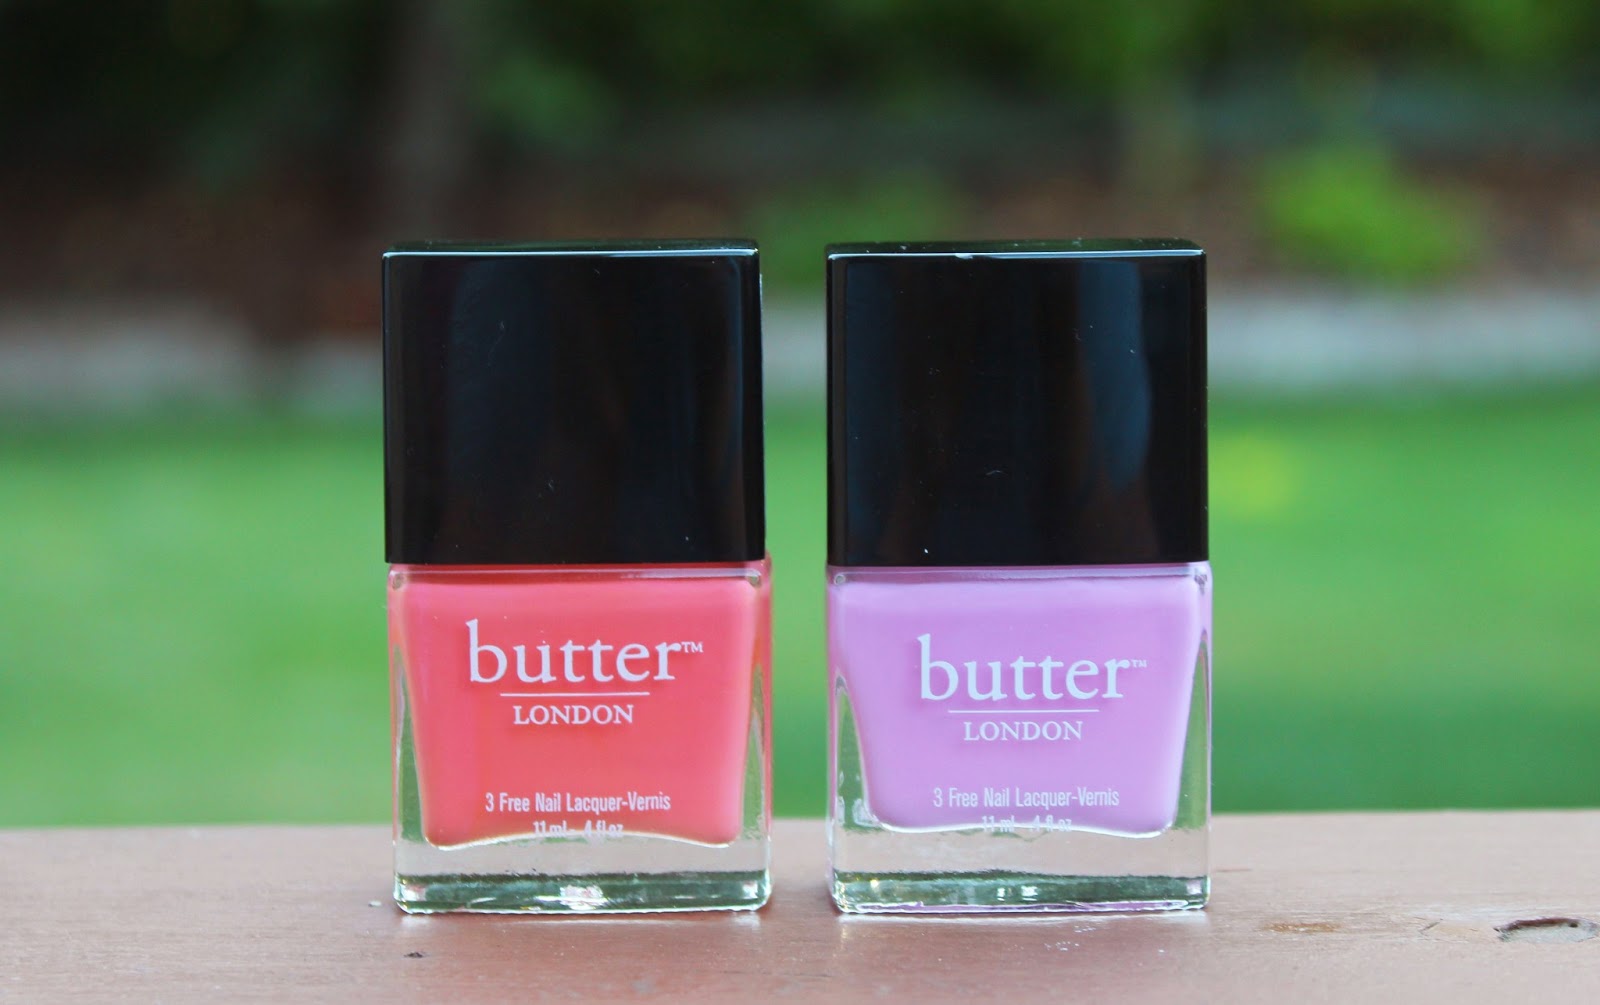 Butter London Nail Lacquer in "Tea with the Queen" - wide 3